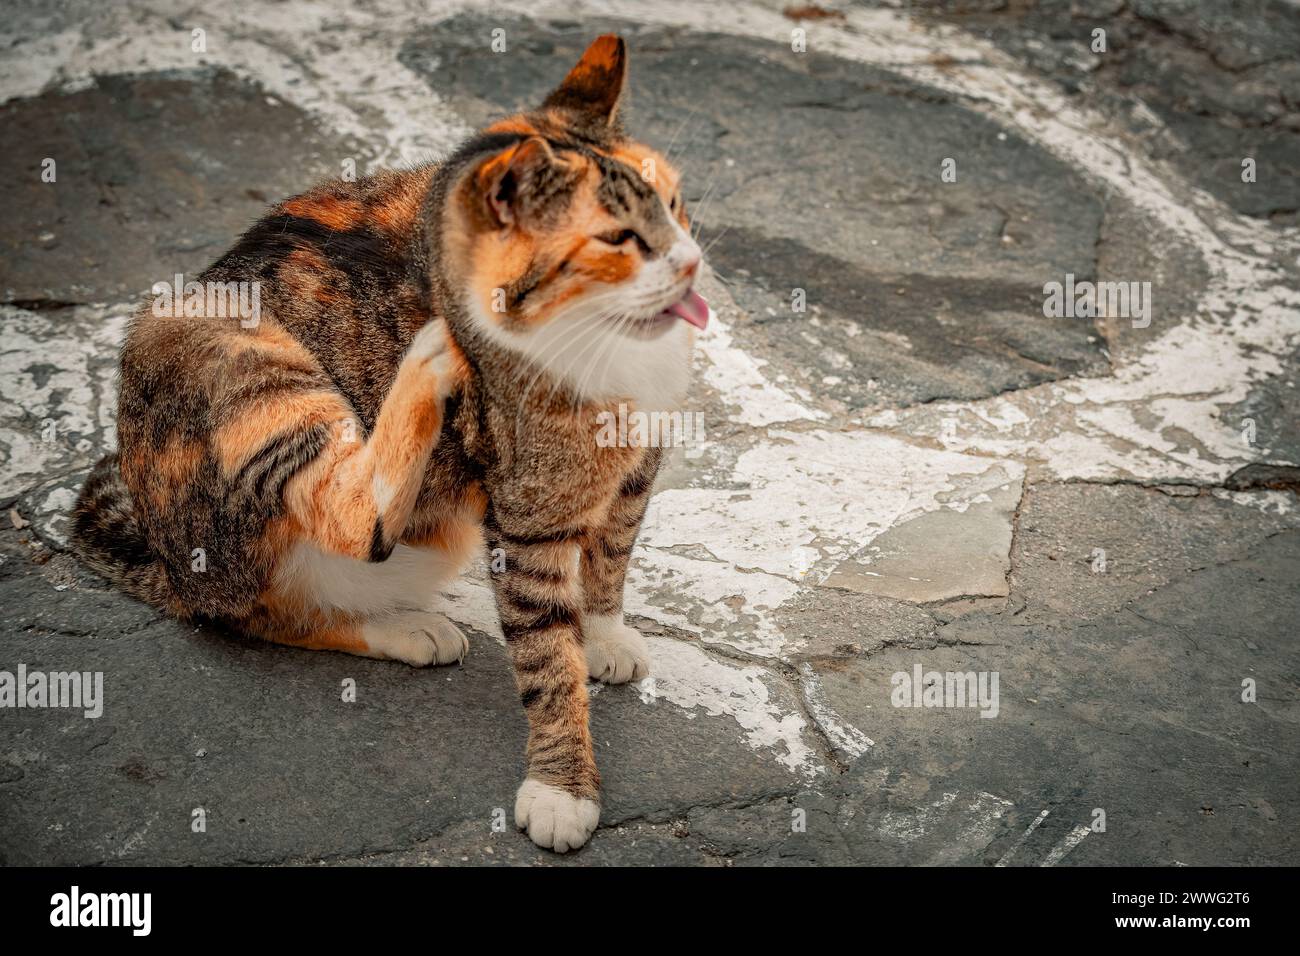 An alley cat licks its paw clean, a glimpse of everyday cat life in an urban setting. Stock Photo